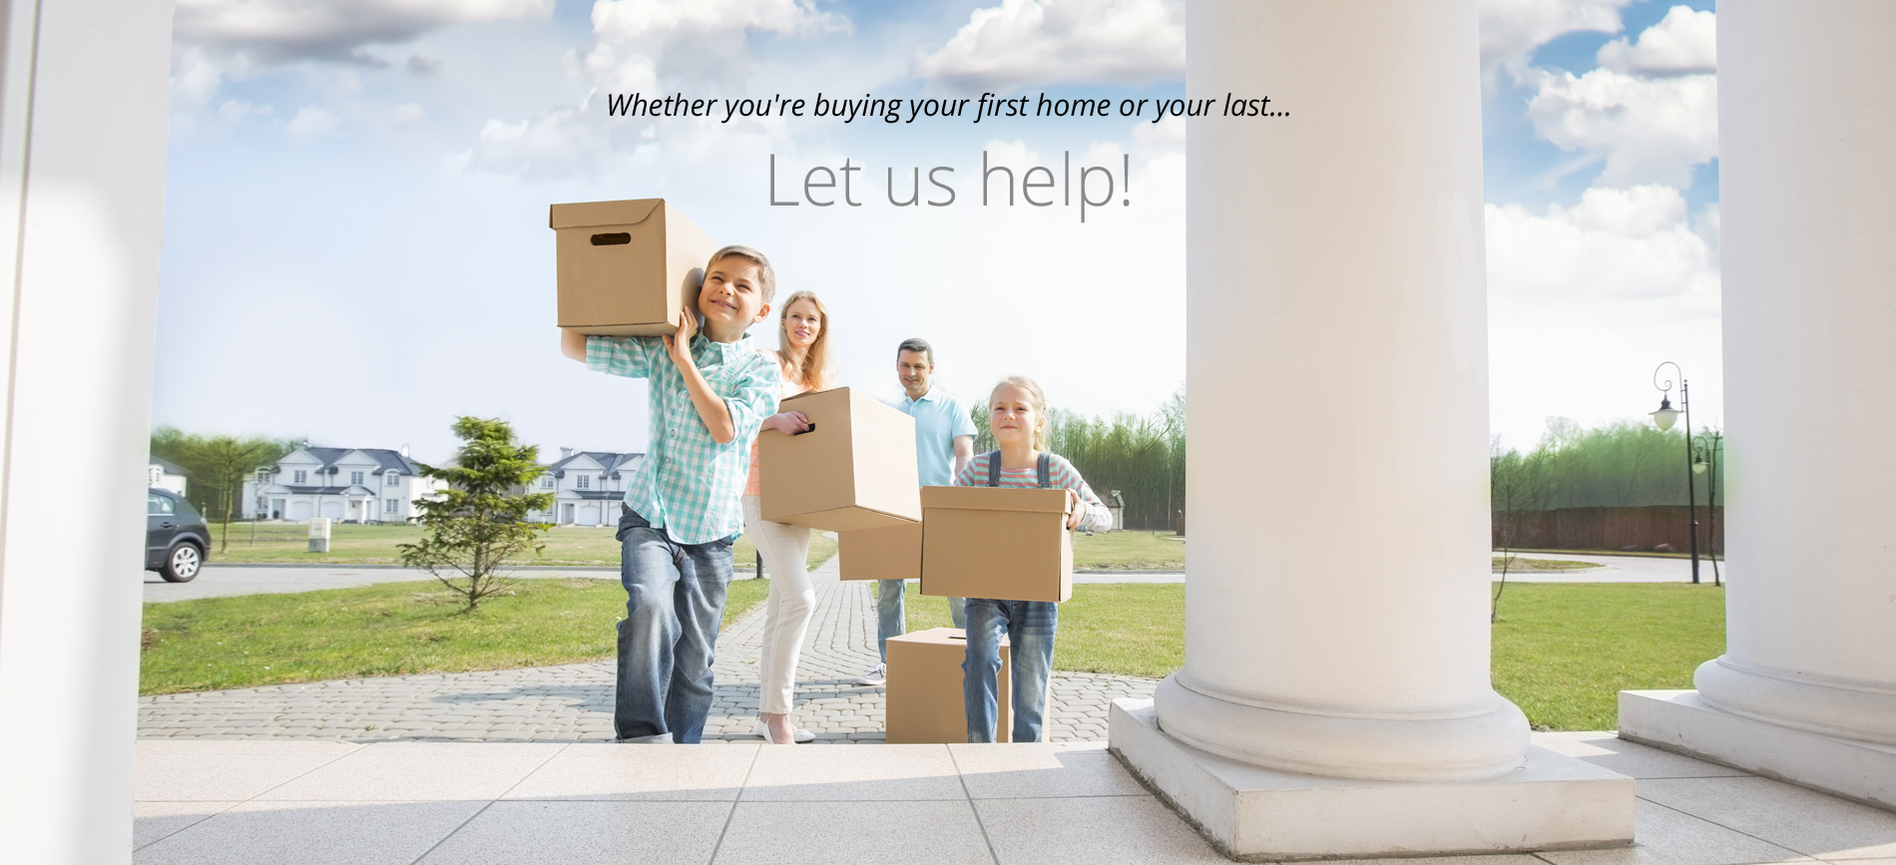 Whether you're buying your first home or your last, let us help!